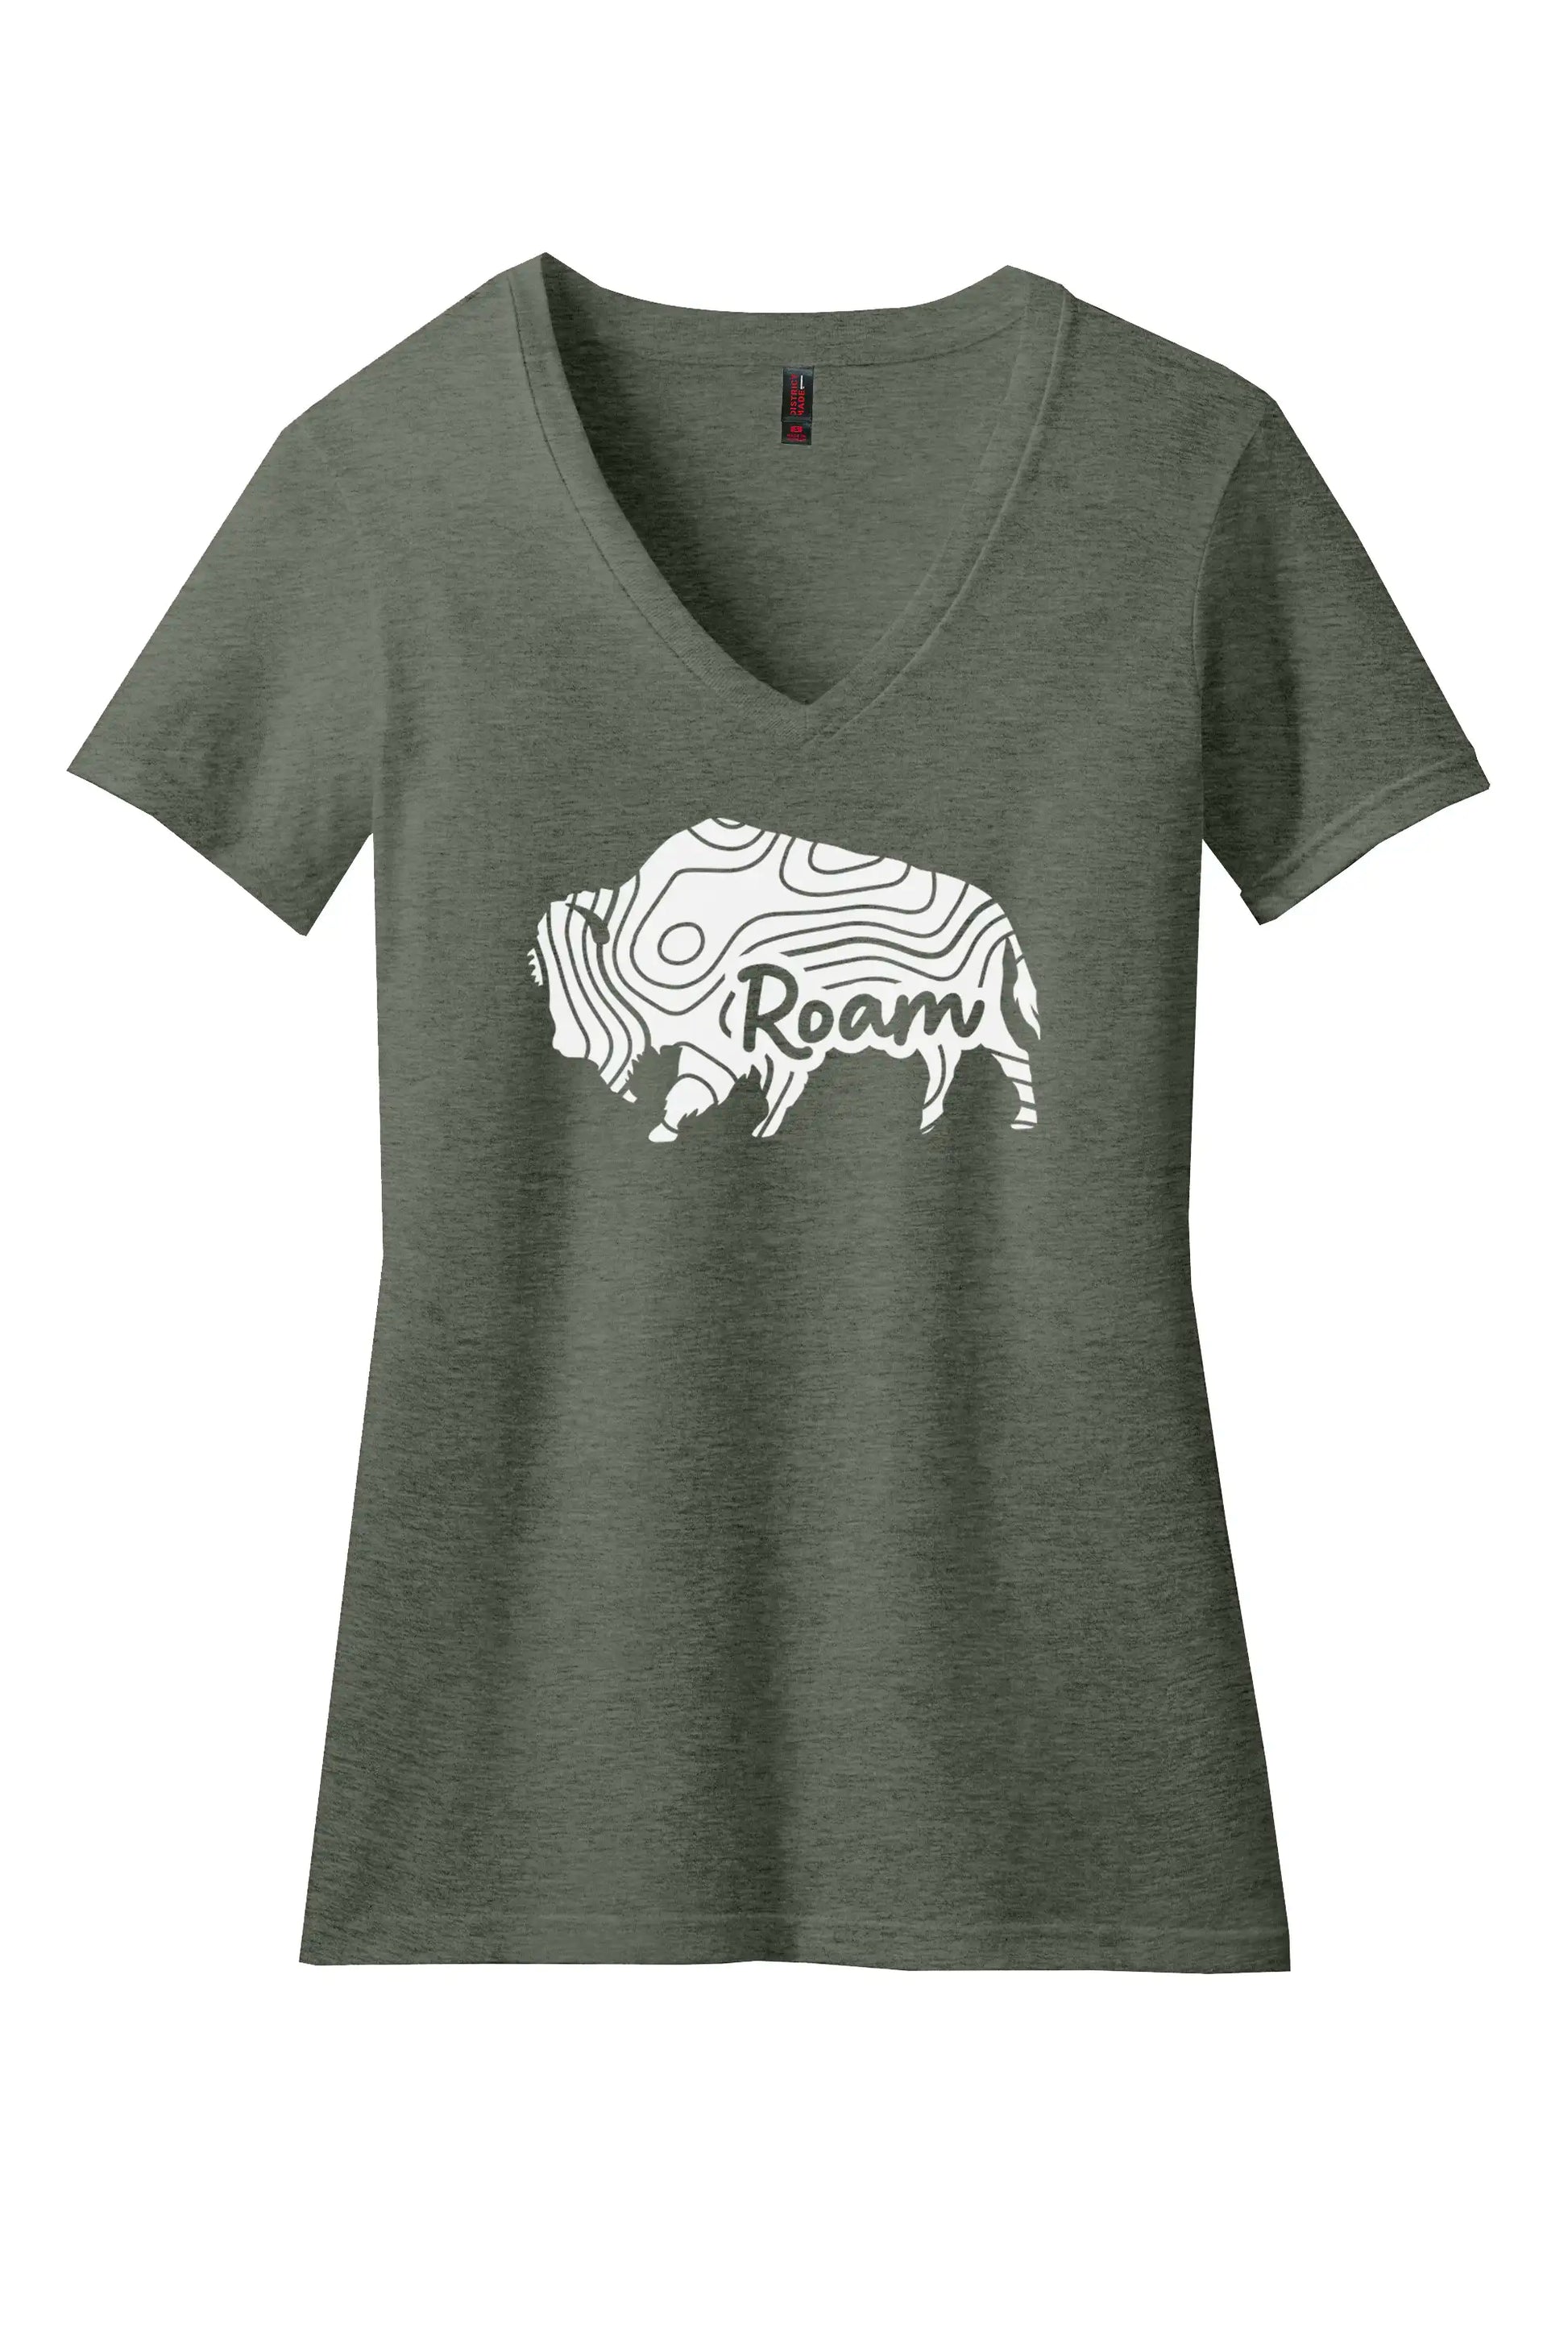 Bison Buffalo Topographic Womens Premium V-Neck Tee Heathered Olive Color For Adventure